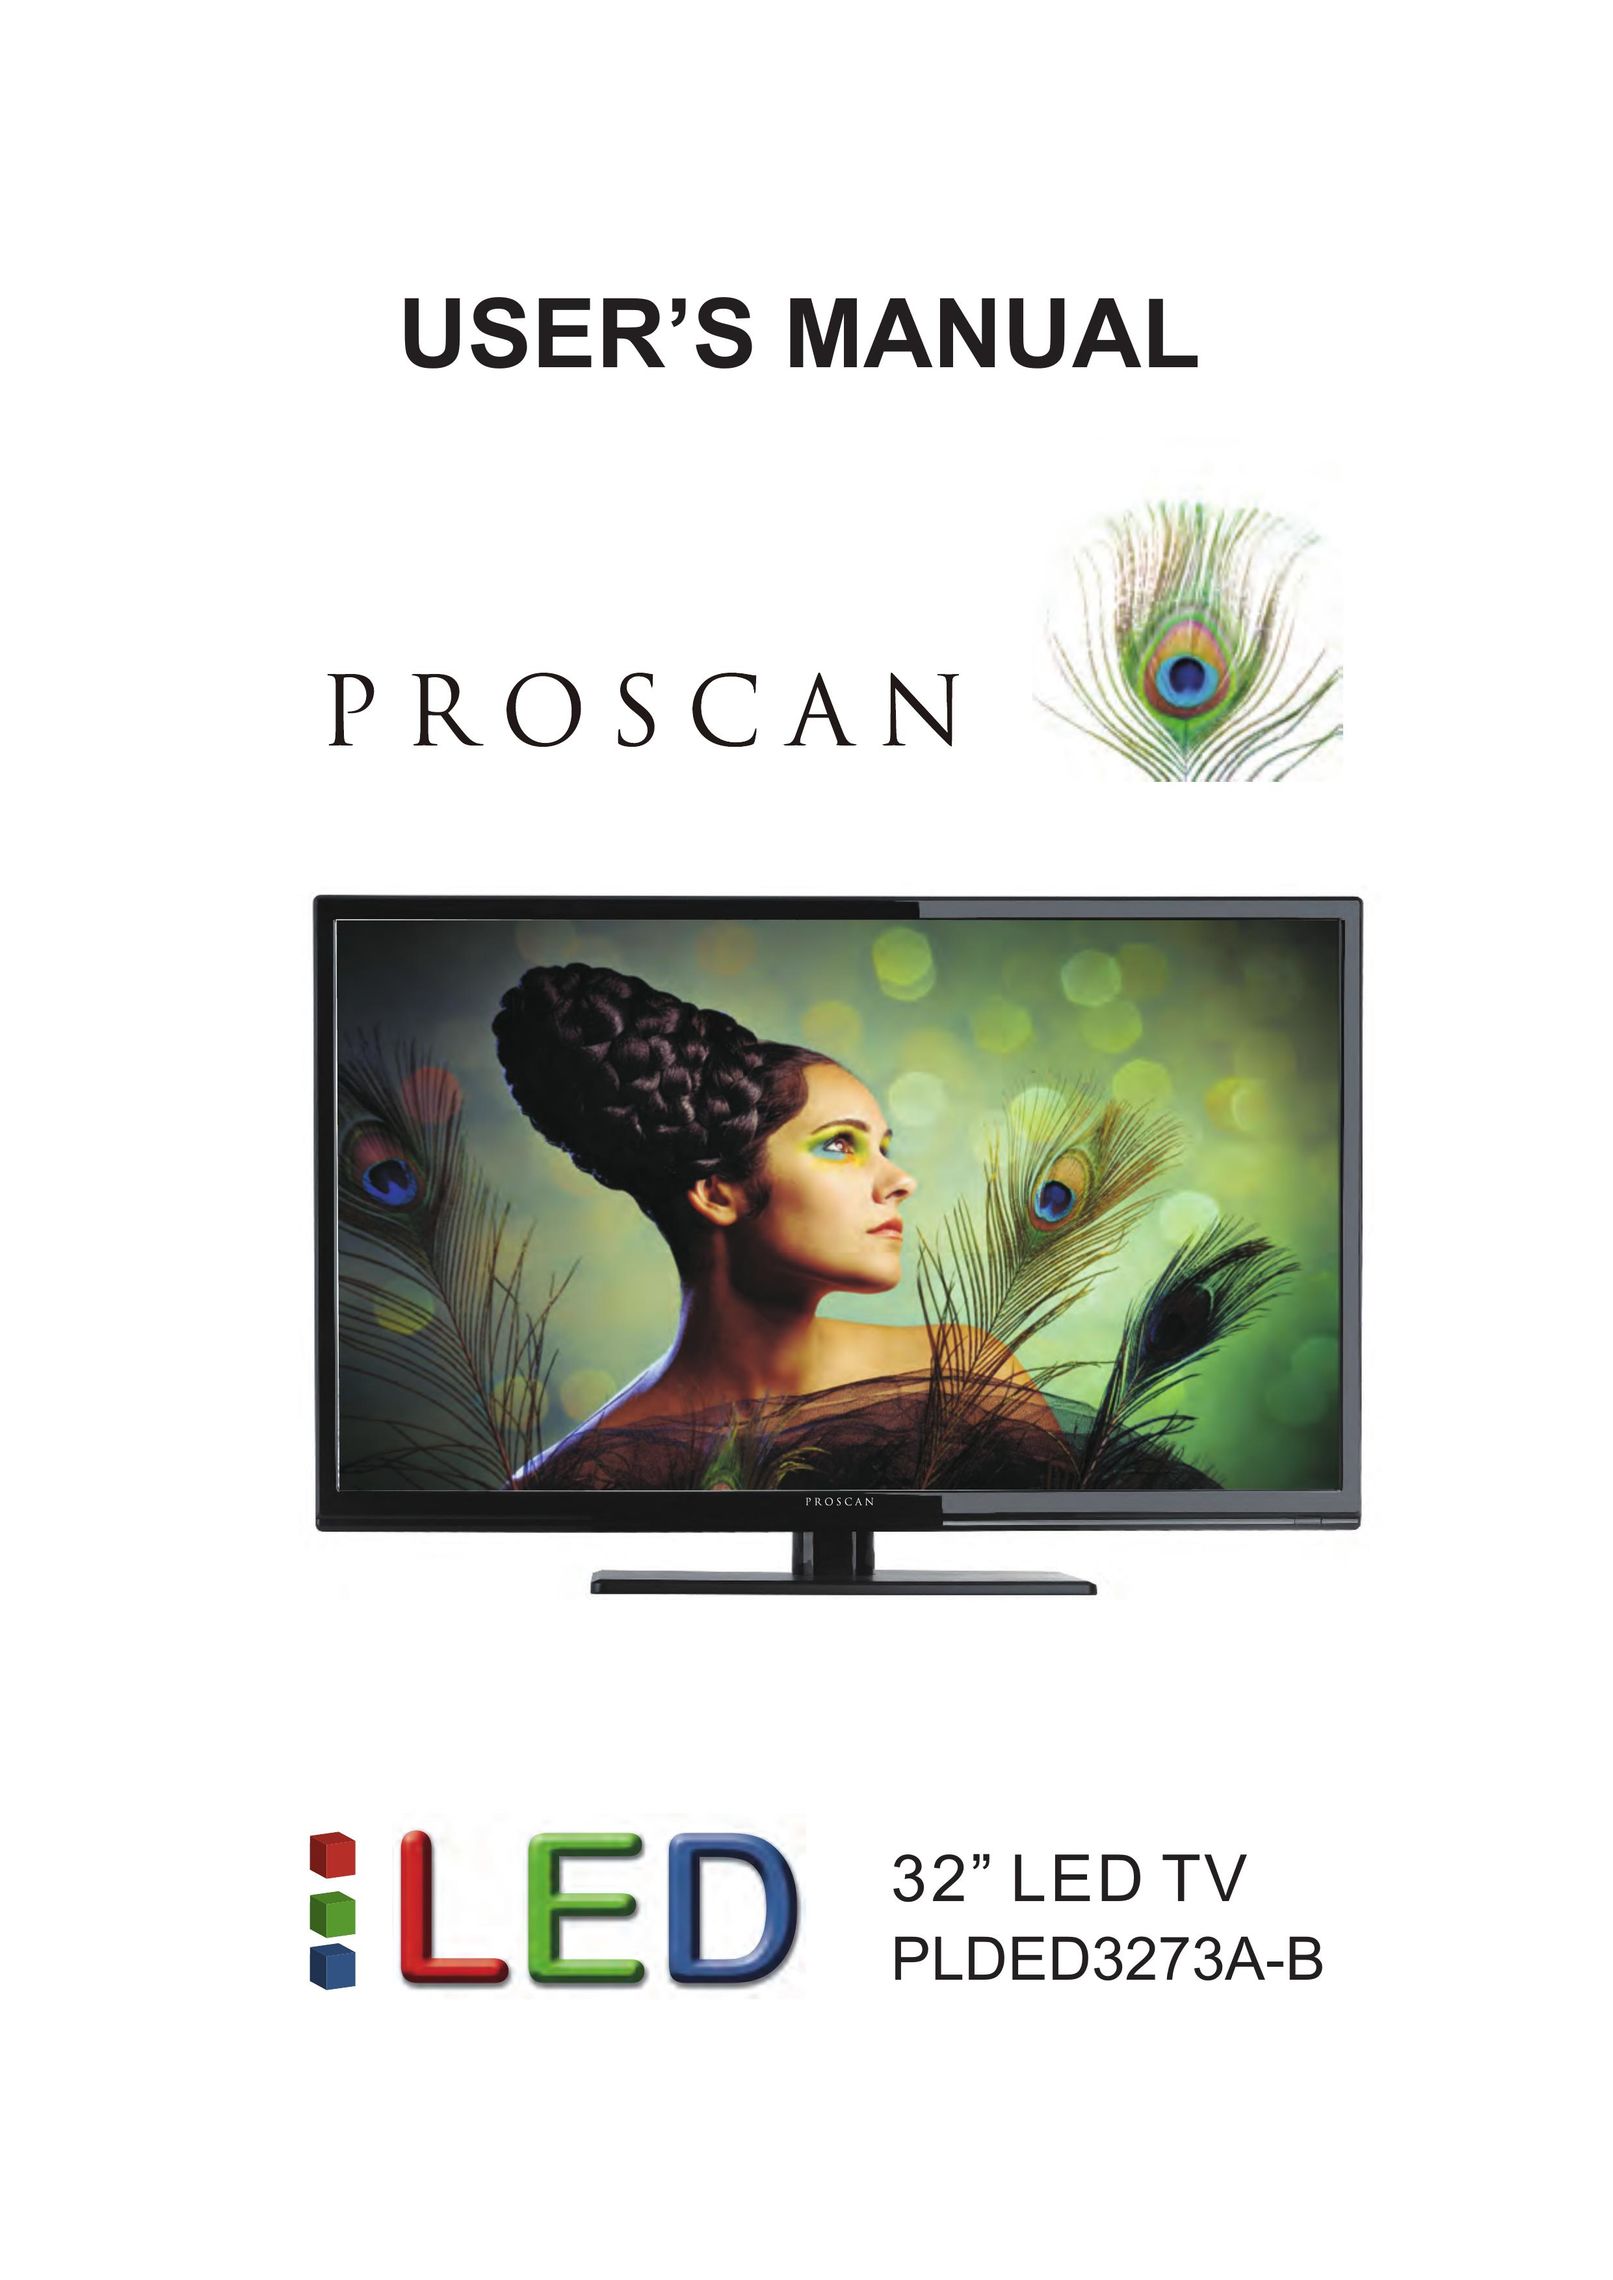 ProScan PLDED3273A Flat Panel Television User Manual